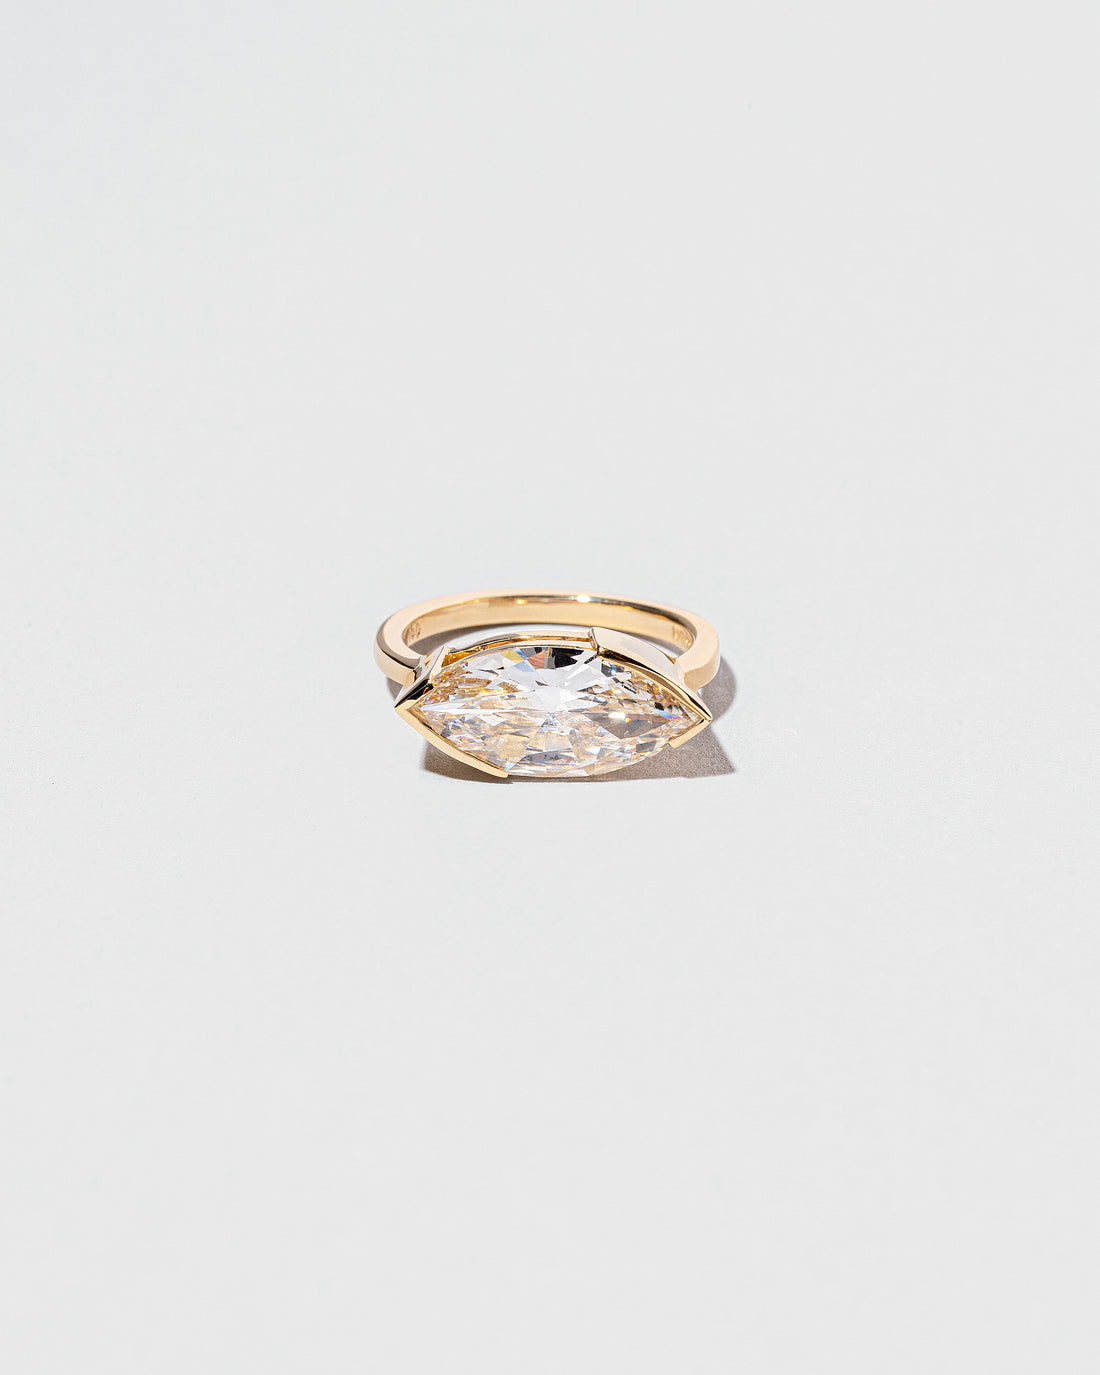 Marquise Brilliant Cut Diamond Solitaire Ring front facing